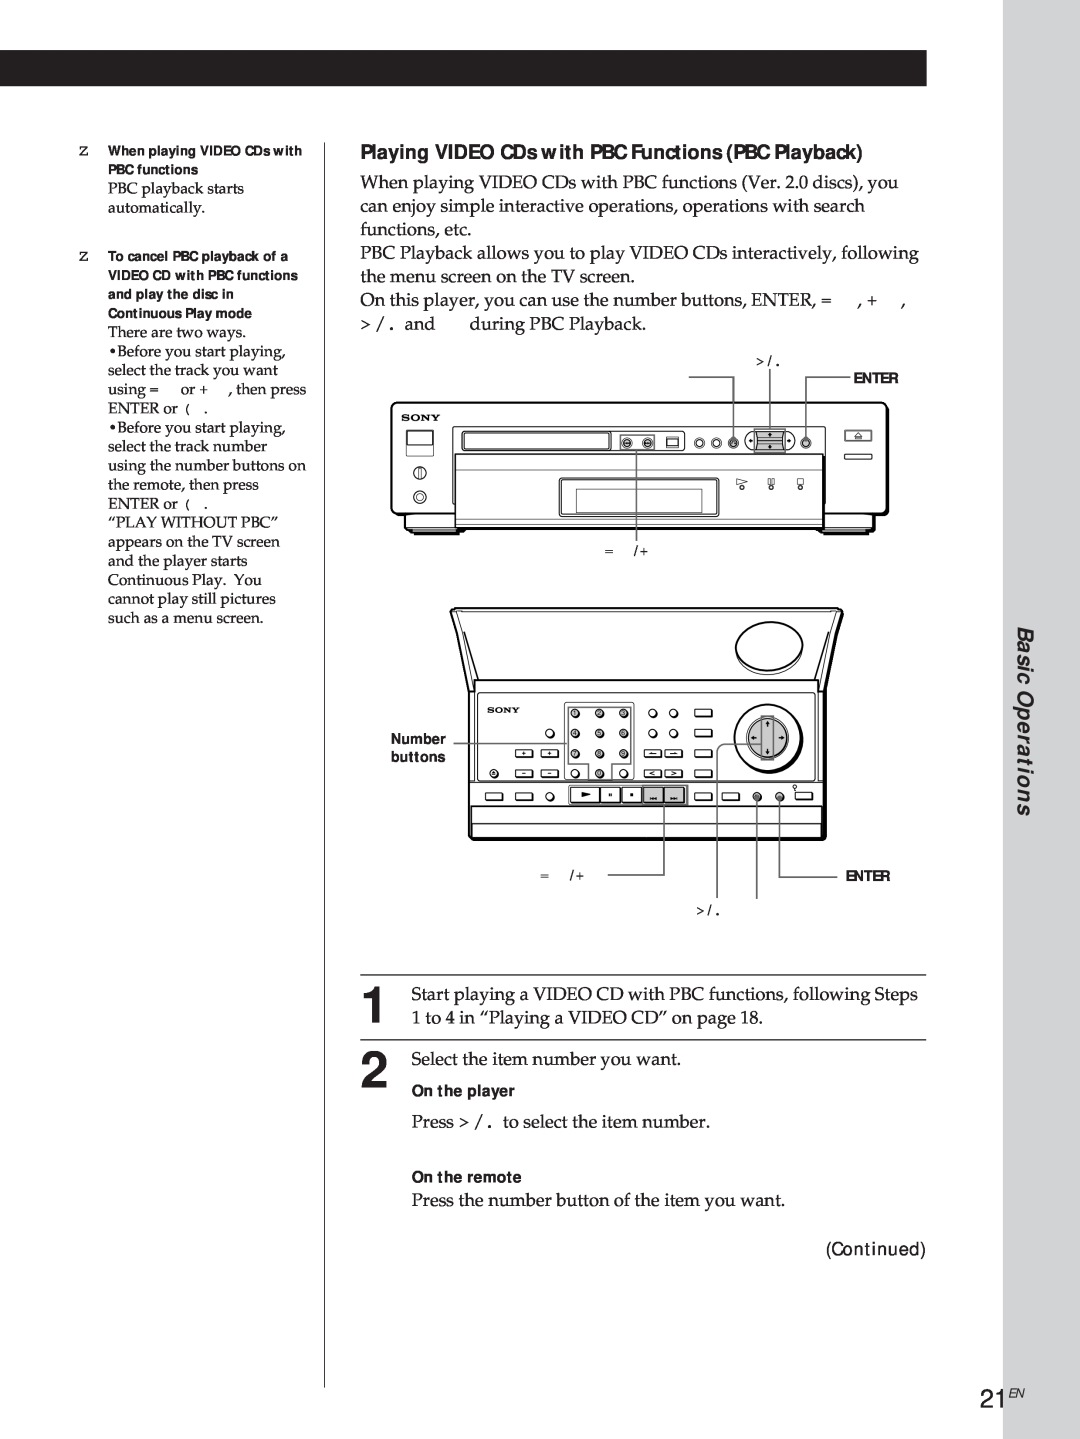 Sony DVP3980 manual 21EN, Basic Operations, Playing VIDEO CDs with PBC Functions PBC Playback 